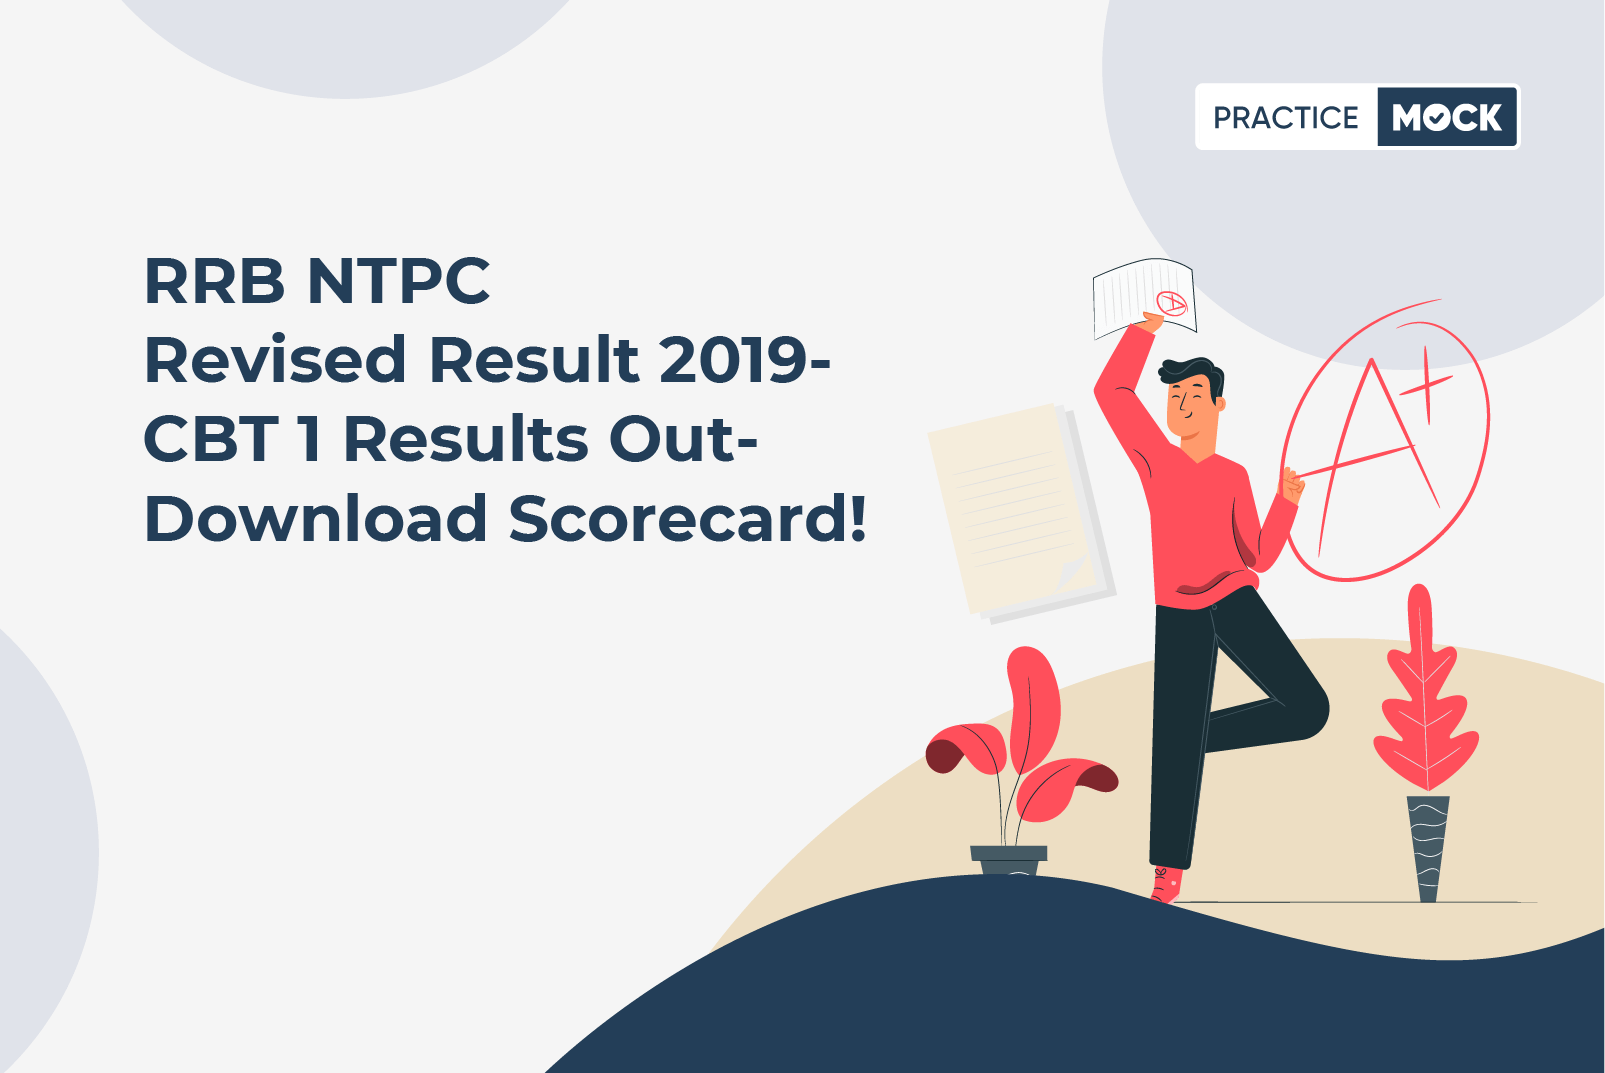 RRB NTPC revised result 2019-CBT 1 results out-Download your Scorecard